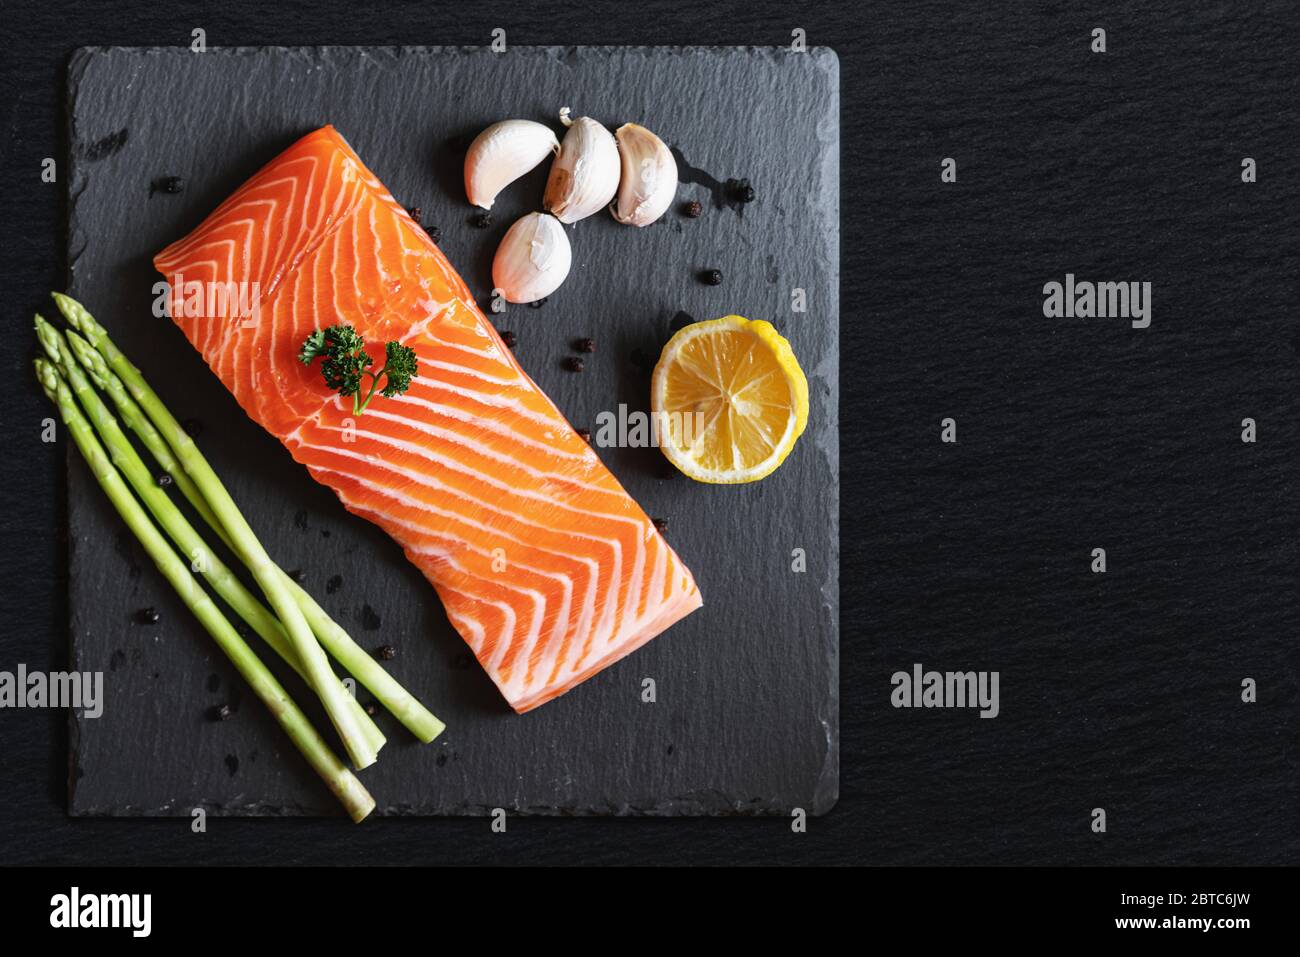 Raw fresh salmon fillet with herbs and ingredients, on black stone plate with copy space Stock Photo